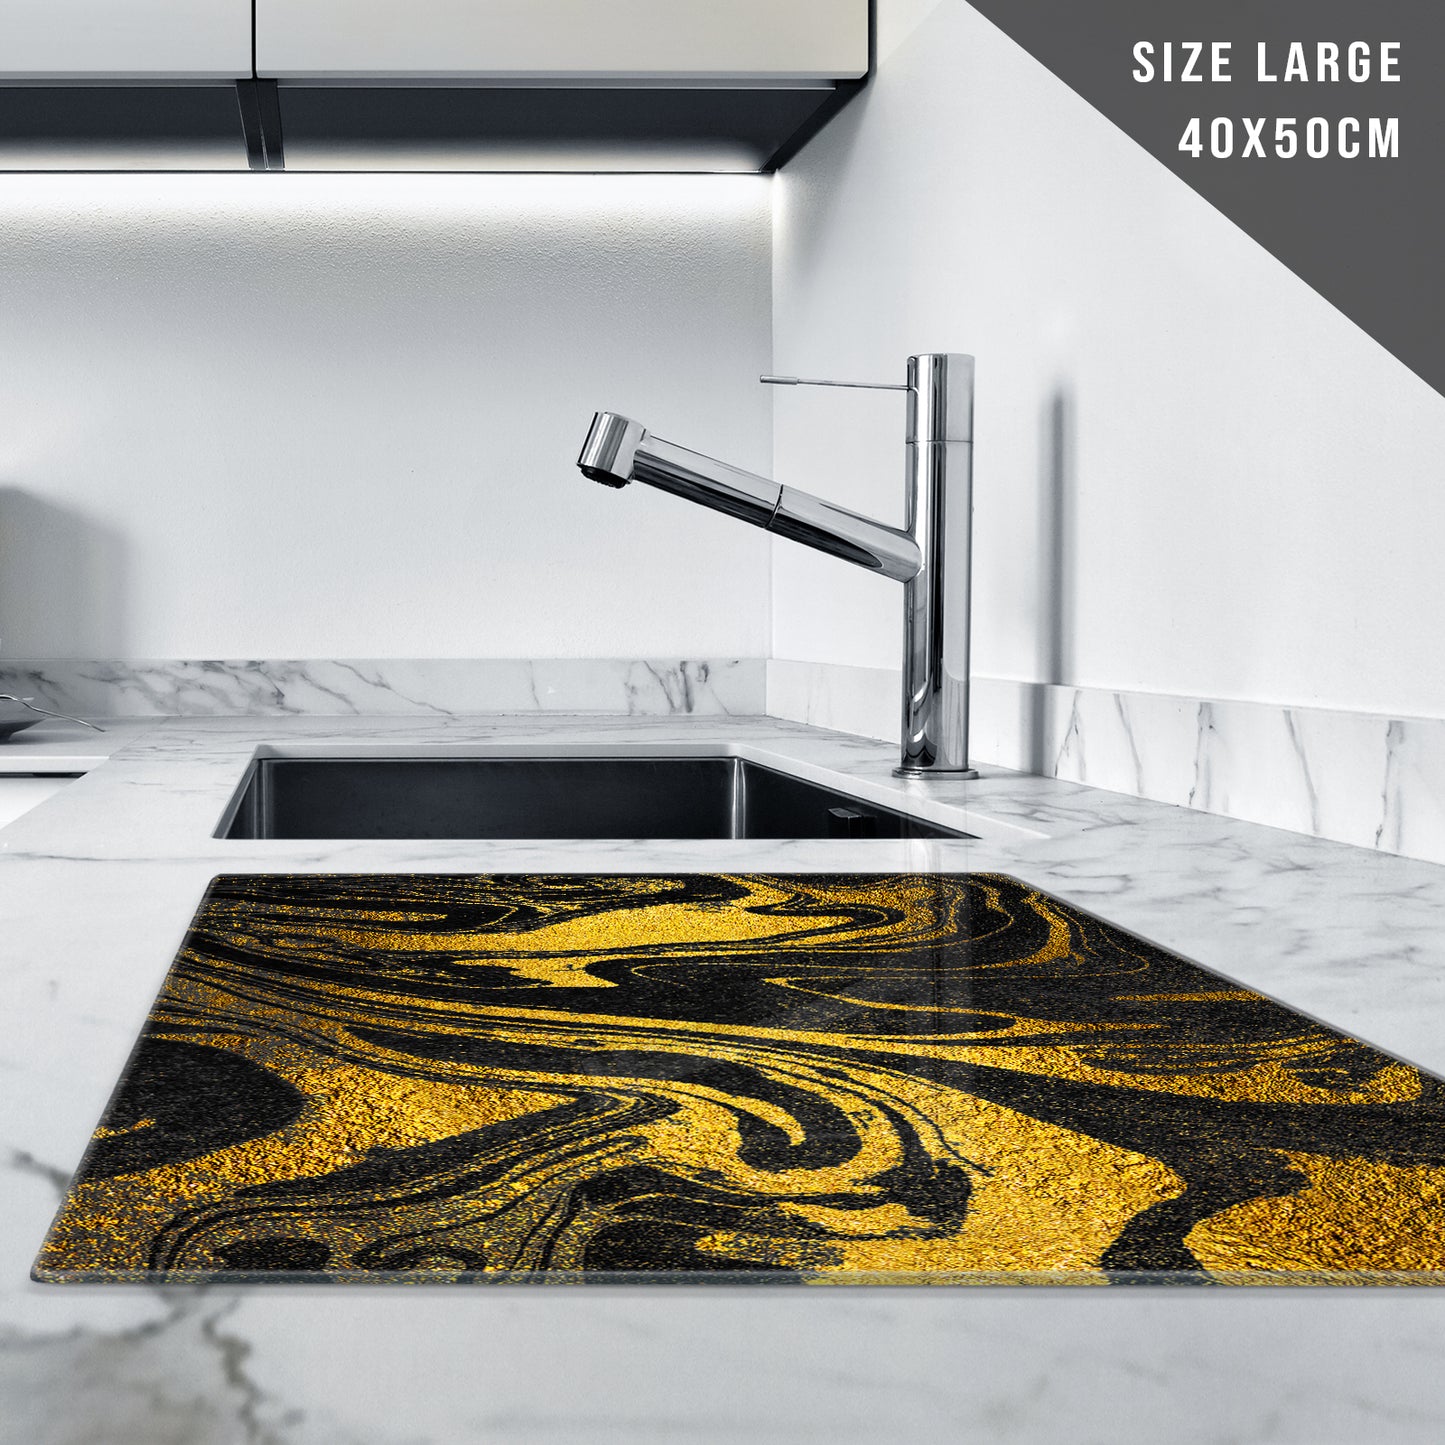 Glass Chopping Board for Kitchen in Gold Black Art Design